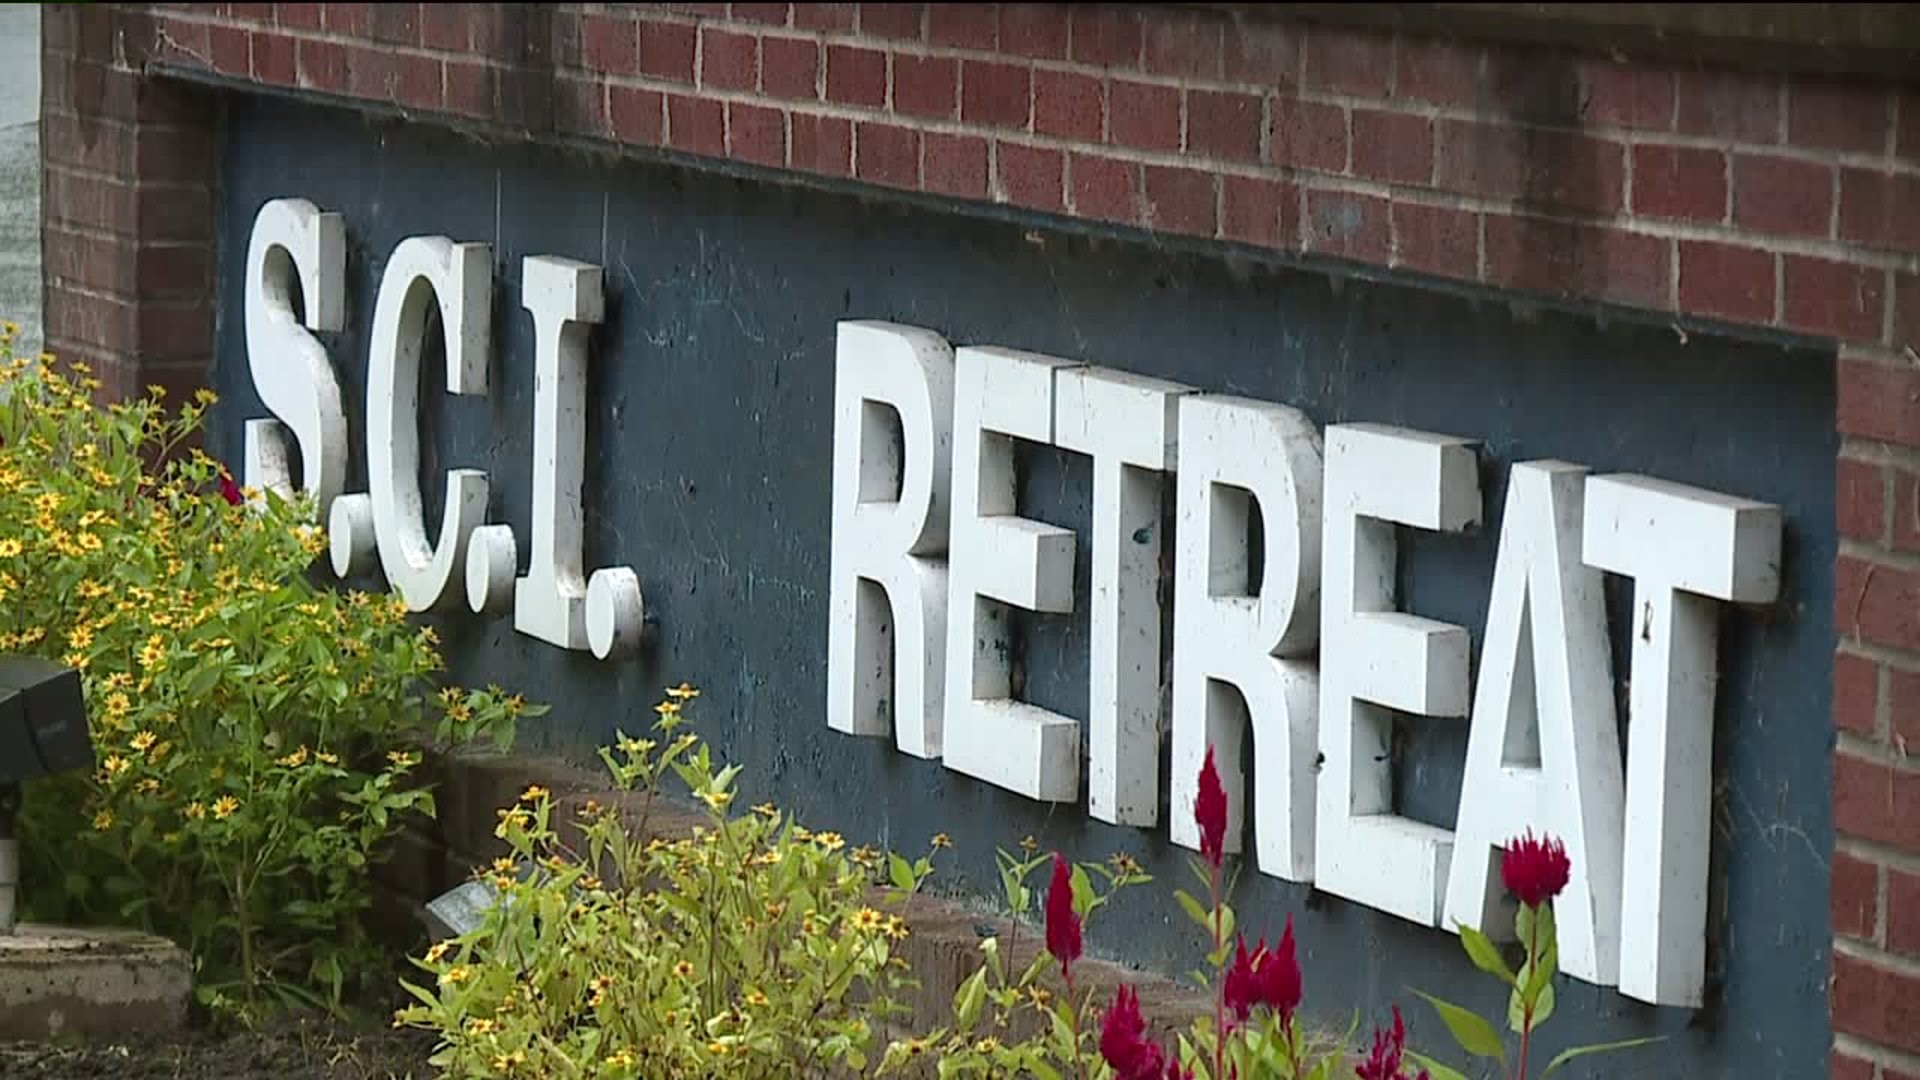 Will PA Department of Corrections close SCI Retreat in Luzerne County?